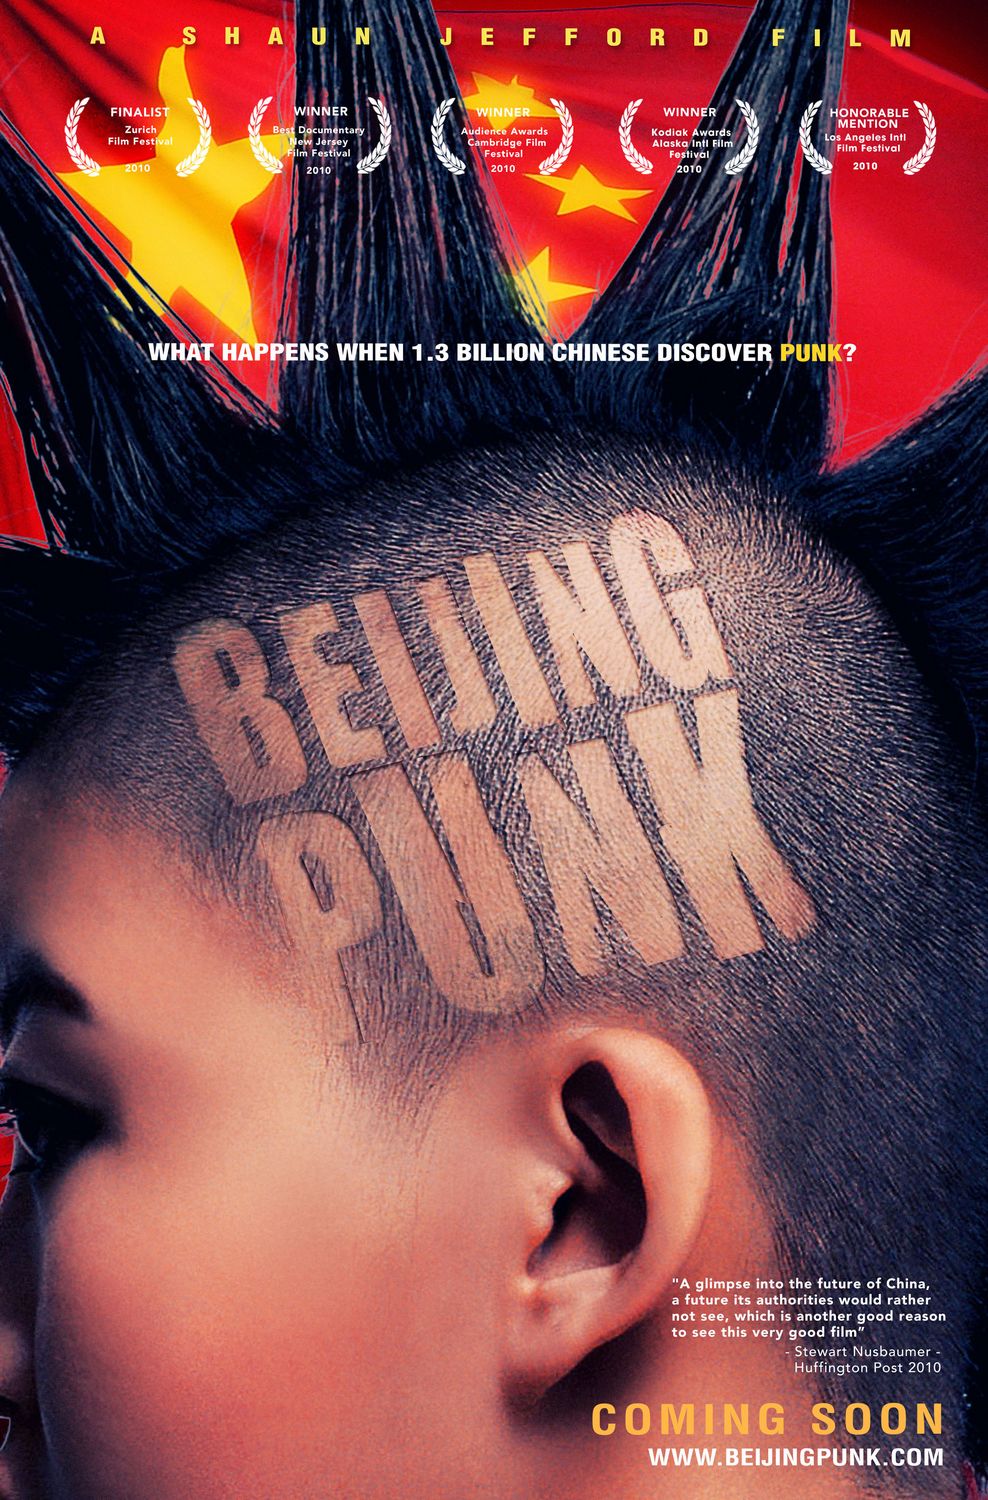 Extra Large Movie Poster Image for Beijing Punk (#2 of 2)